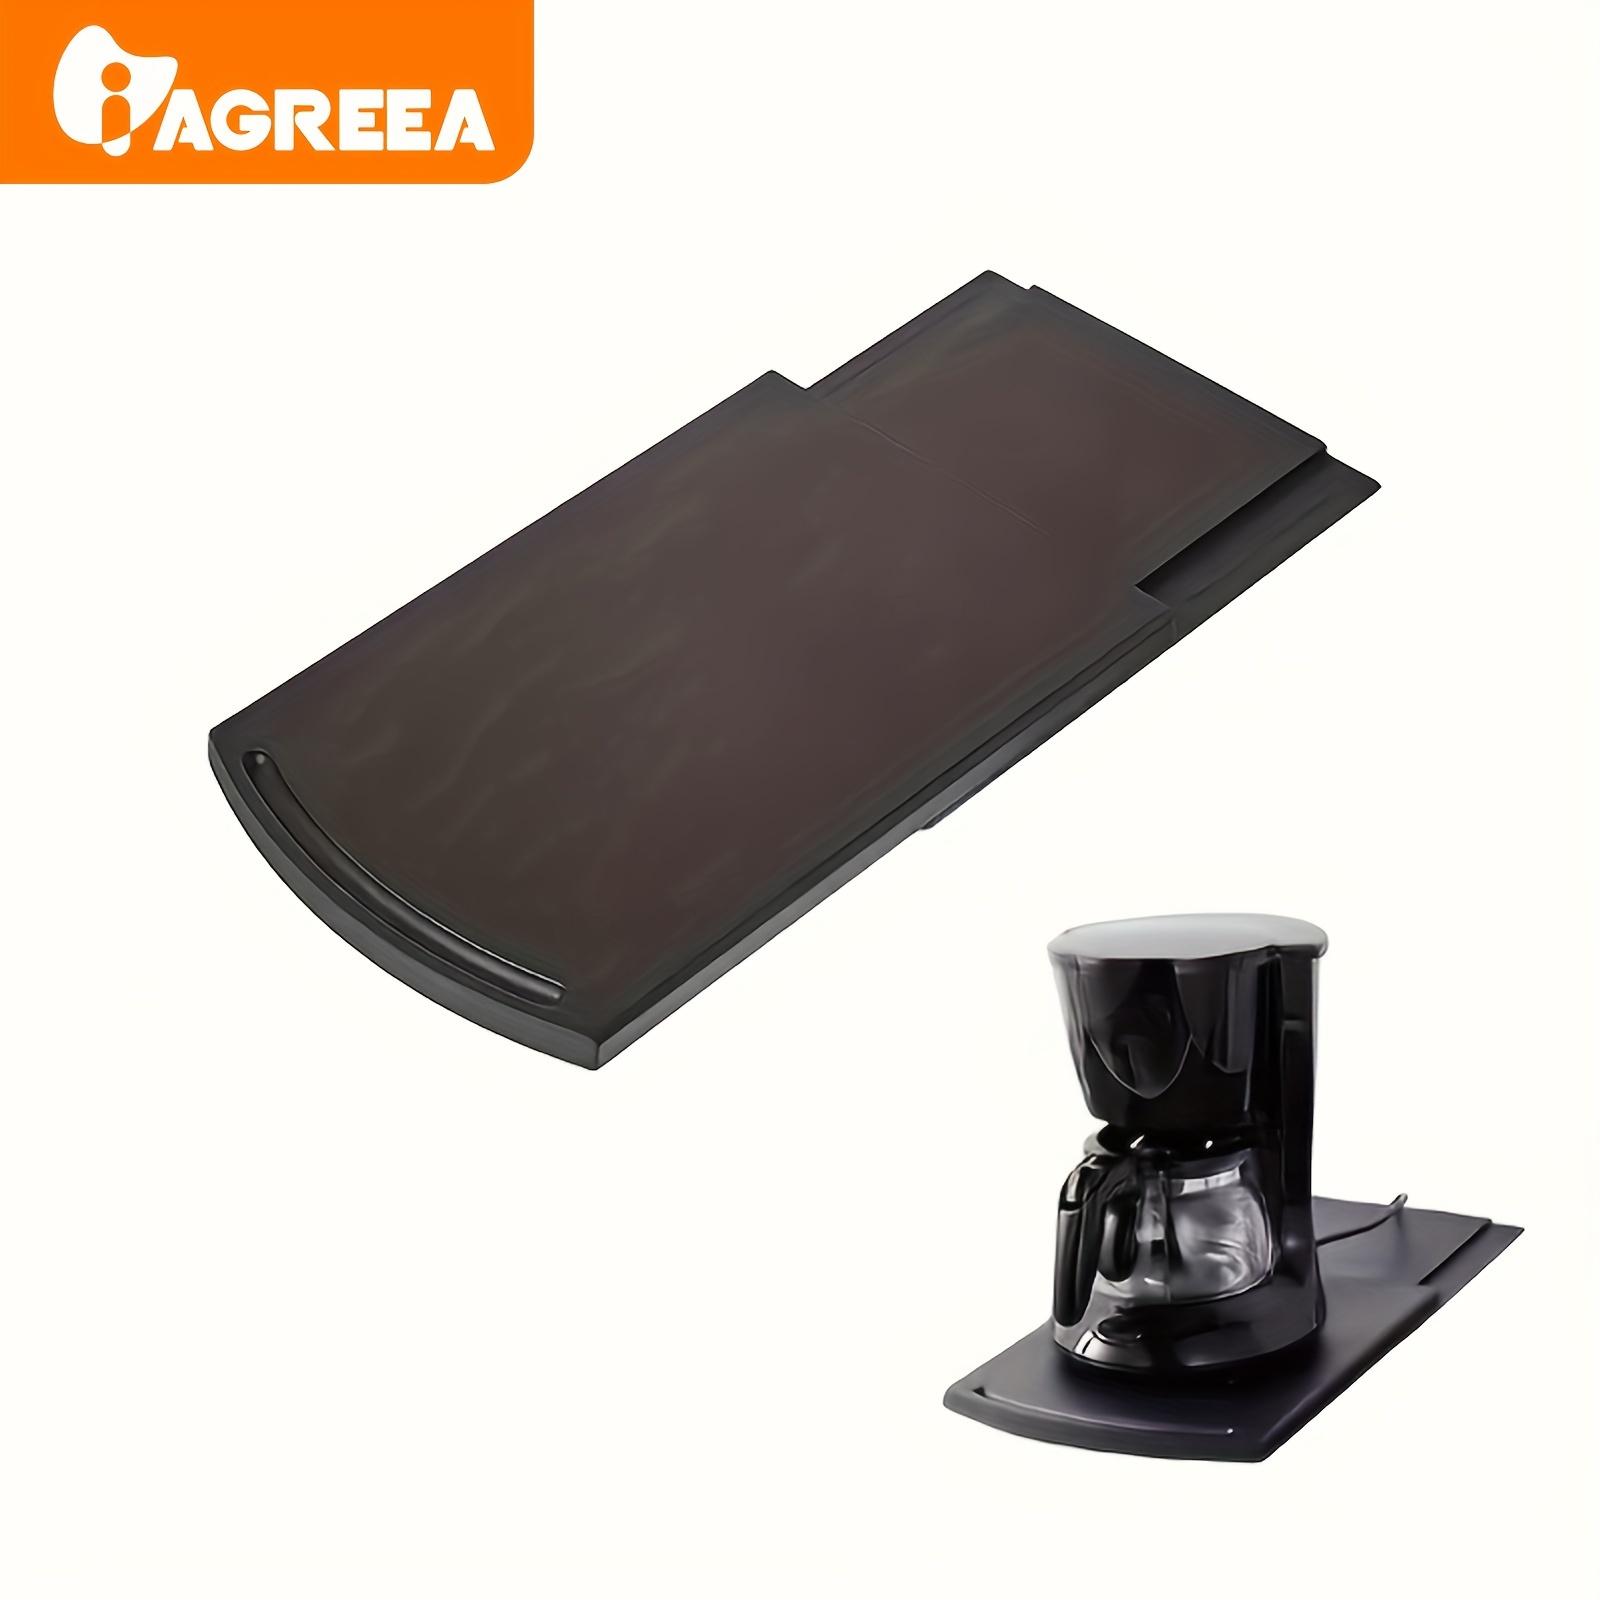 

1pc 12"" Sliding Coffee Maker Tray With Smooth Rolling Wheels - Convenient Kitchen Appliance Caddy For Blender, Toaster, Air Fryer, Pot, Food Processors, And Aid Mixer